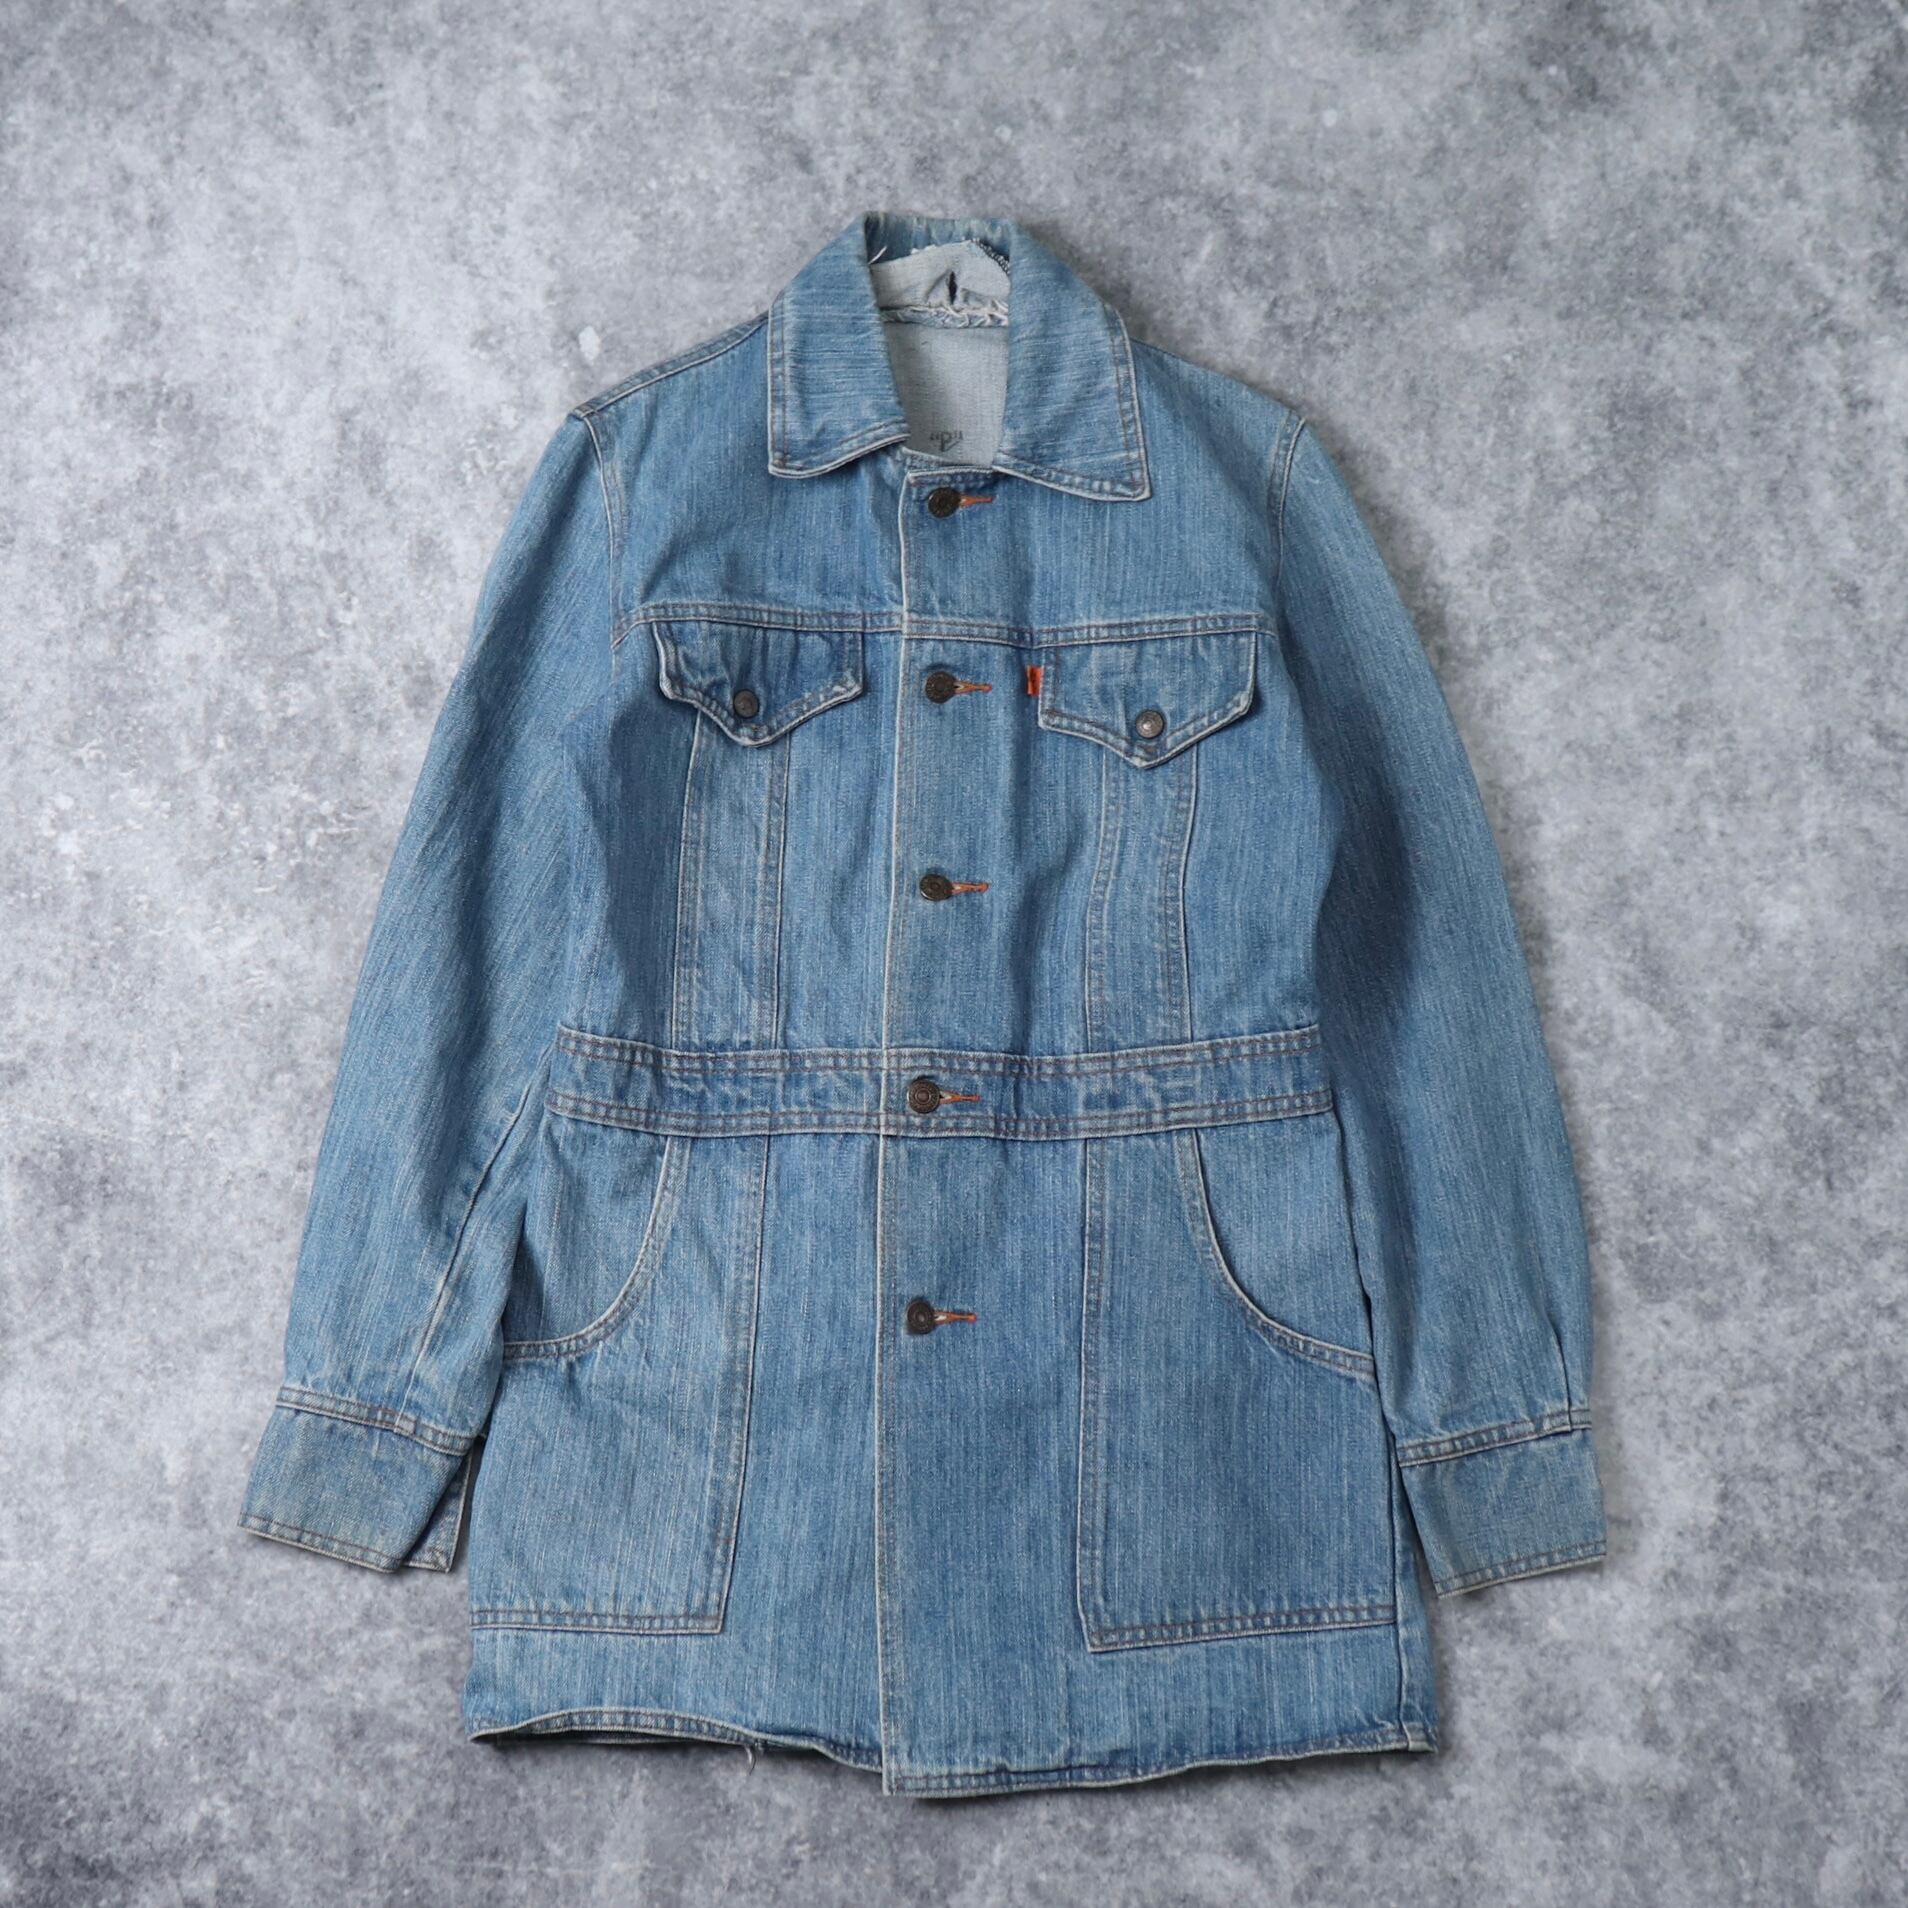 70's Vintage Levi's Bush jacket 70年代 ヴィンテージ リーバイス ブッシュジャケット Small オレンジタブ  ヒッピー 古着　A566 | ROGER'S vintage&used clothing - ロジャース - powered by BASE